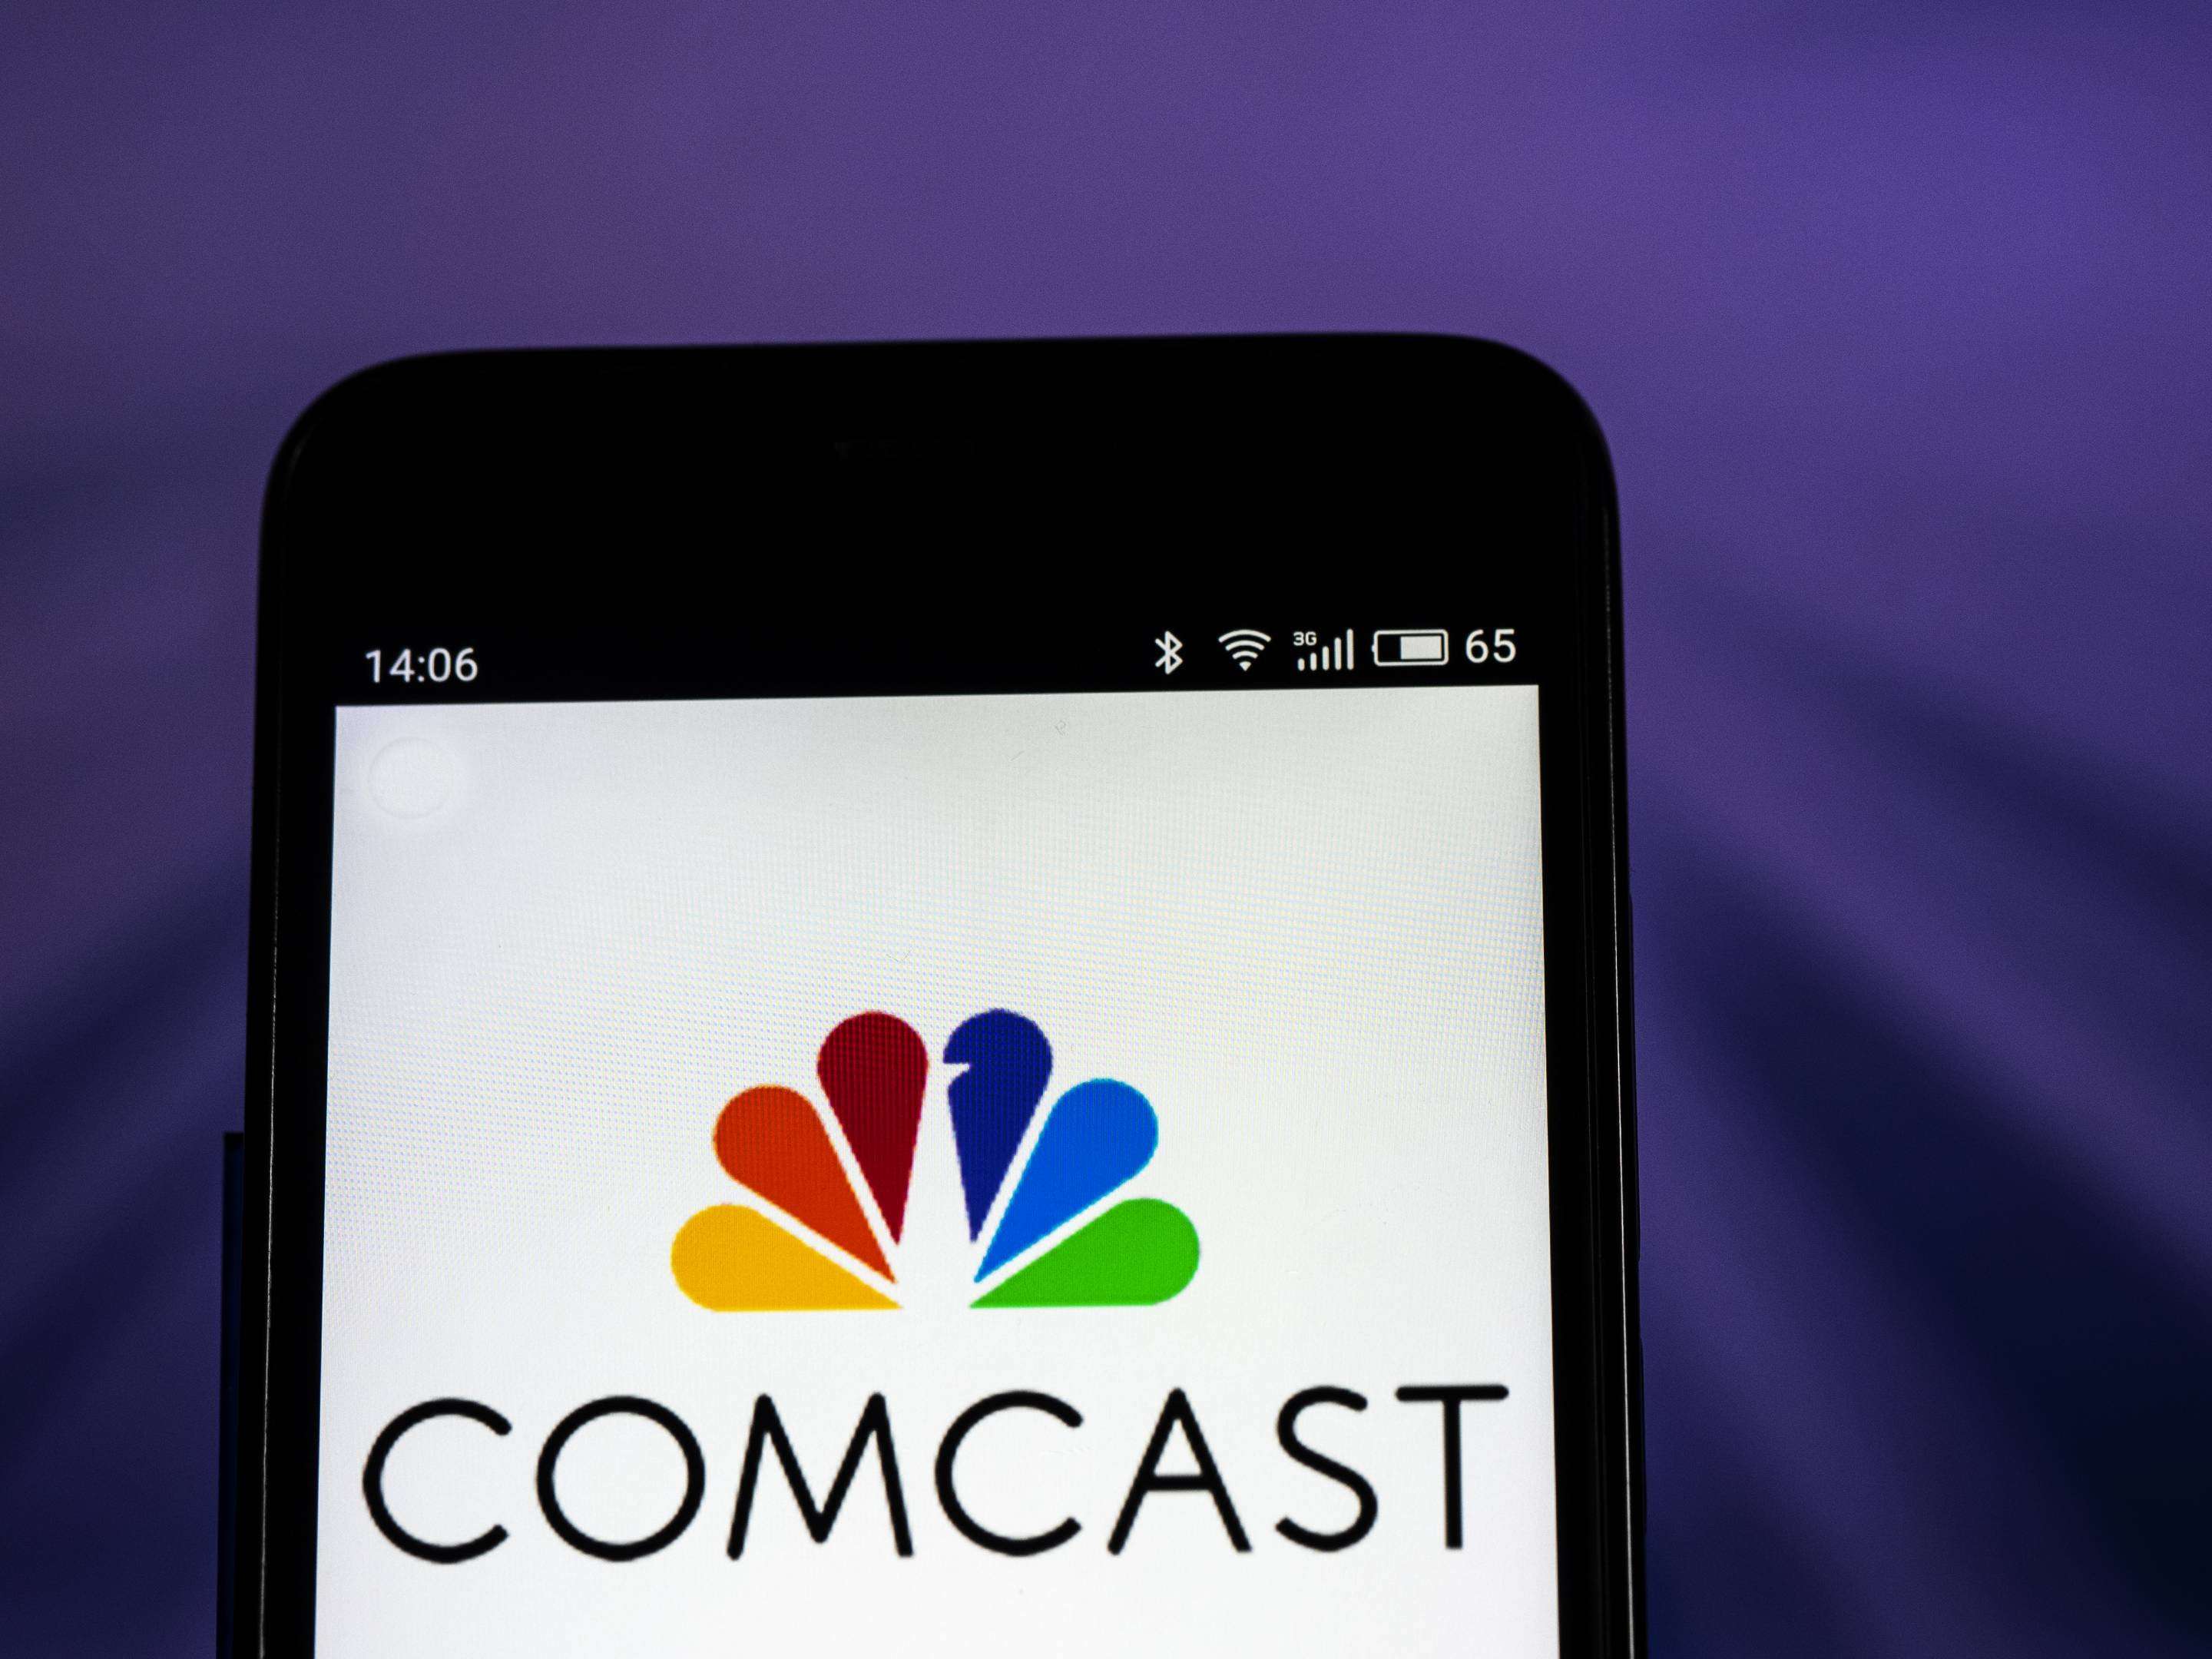 image for Comcast Swindled Customers With Rate Hikes, Bogus Equipment Charges, Lawsuit Claims